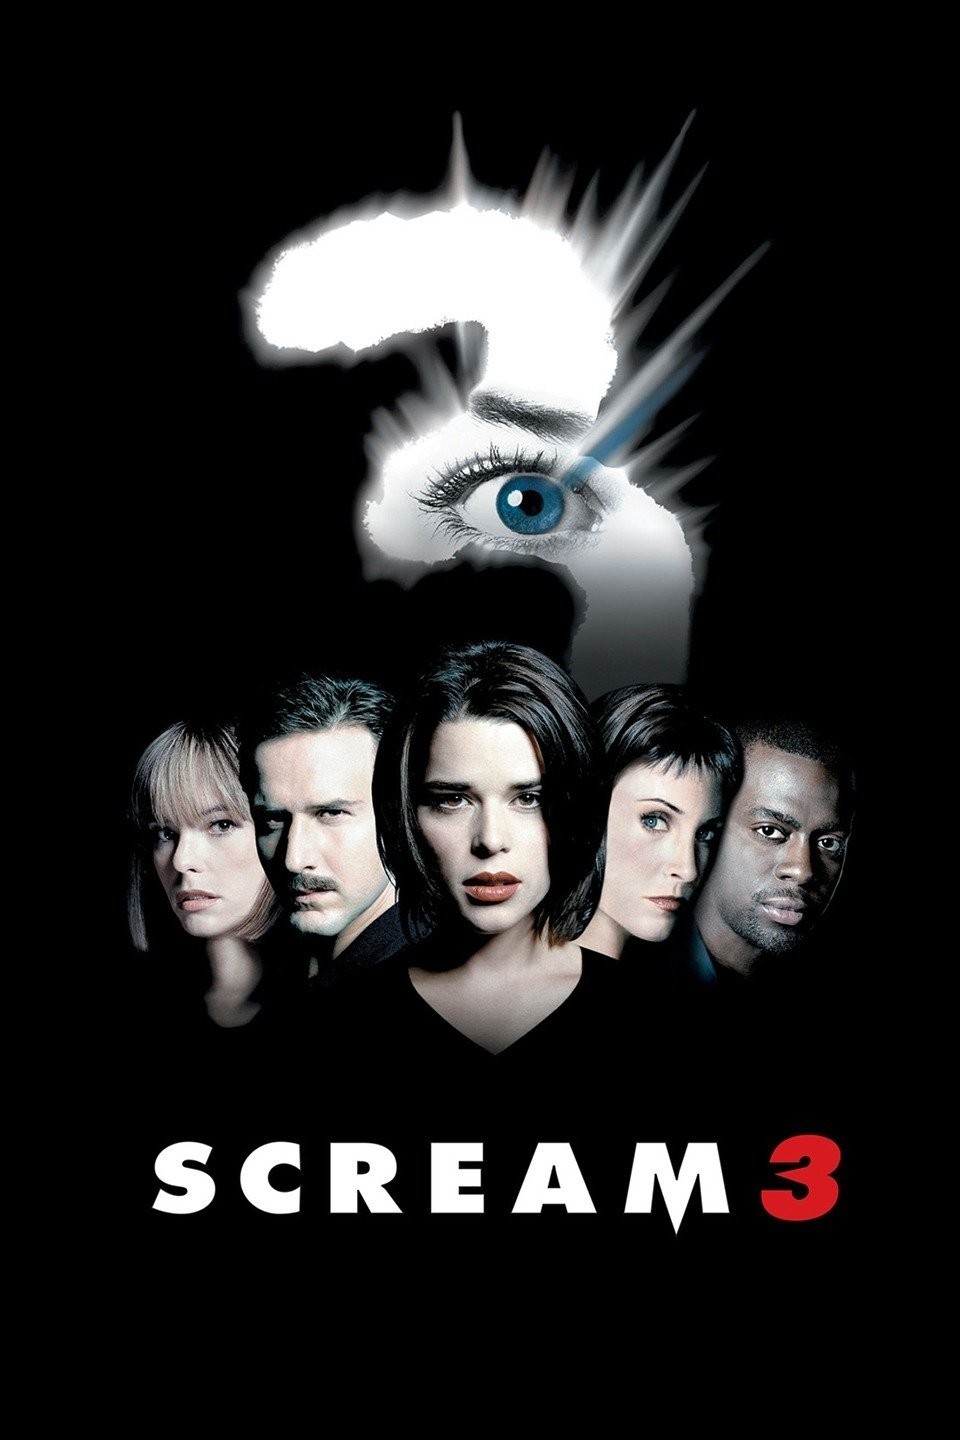 Scream 6 Poster Concepts By Scream-Thrillogy